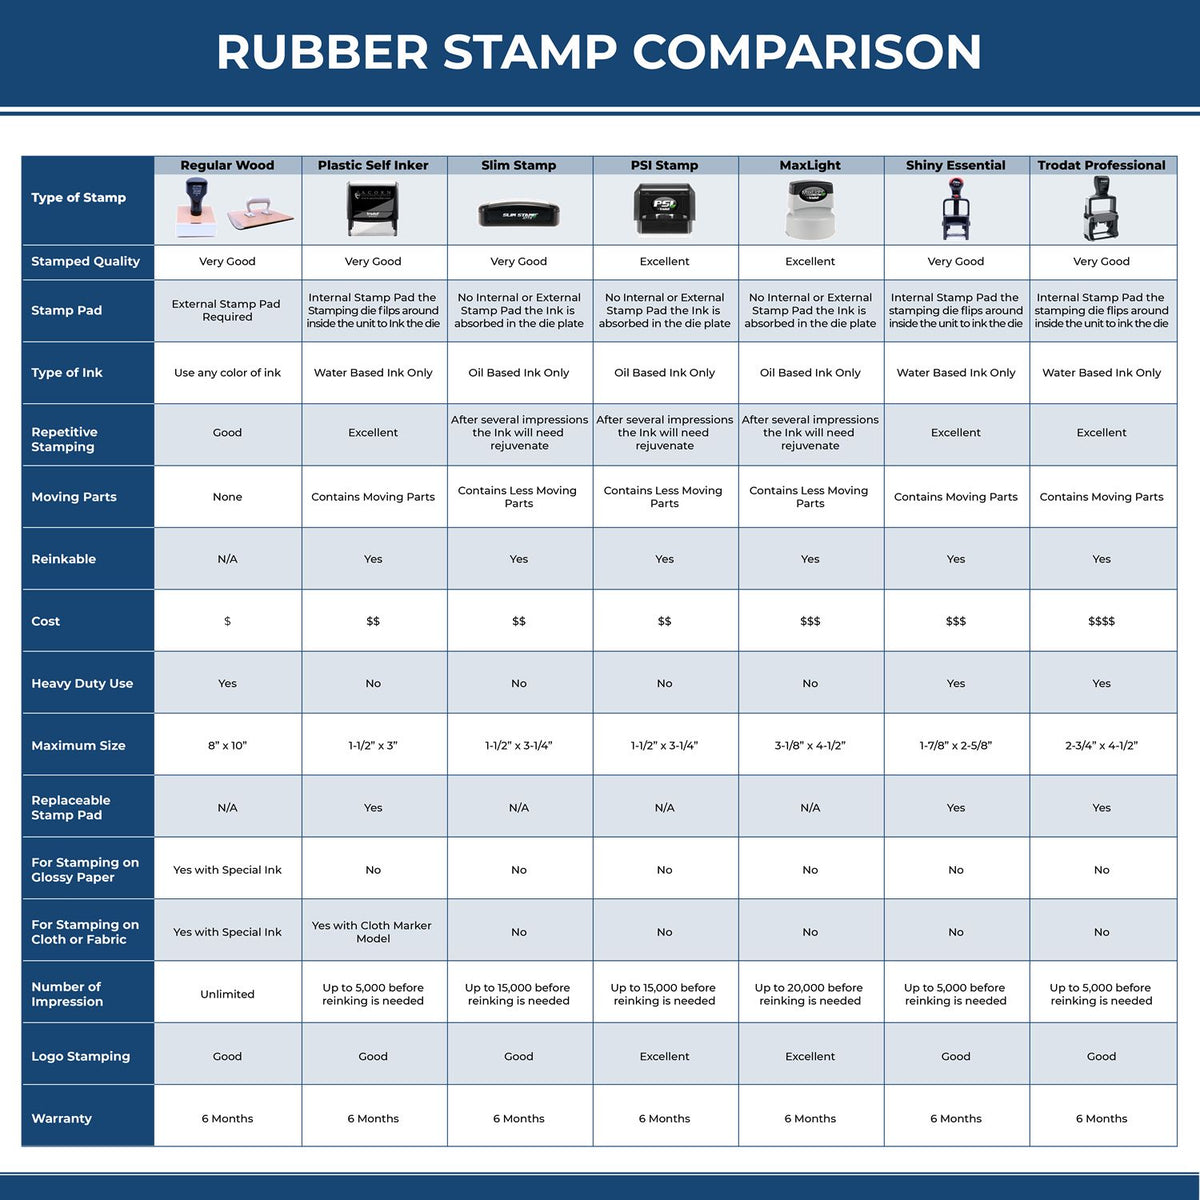 Large To The Parents Of with Line Rubber Stamp 5596R Rubber Stamp Comparison